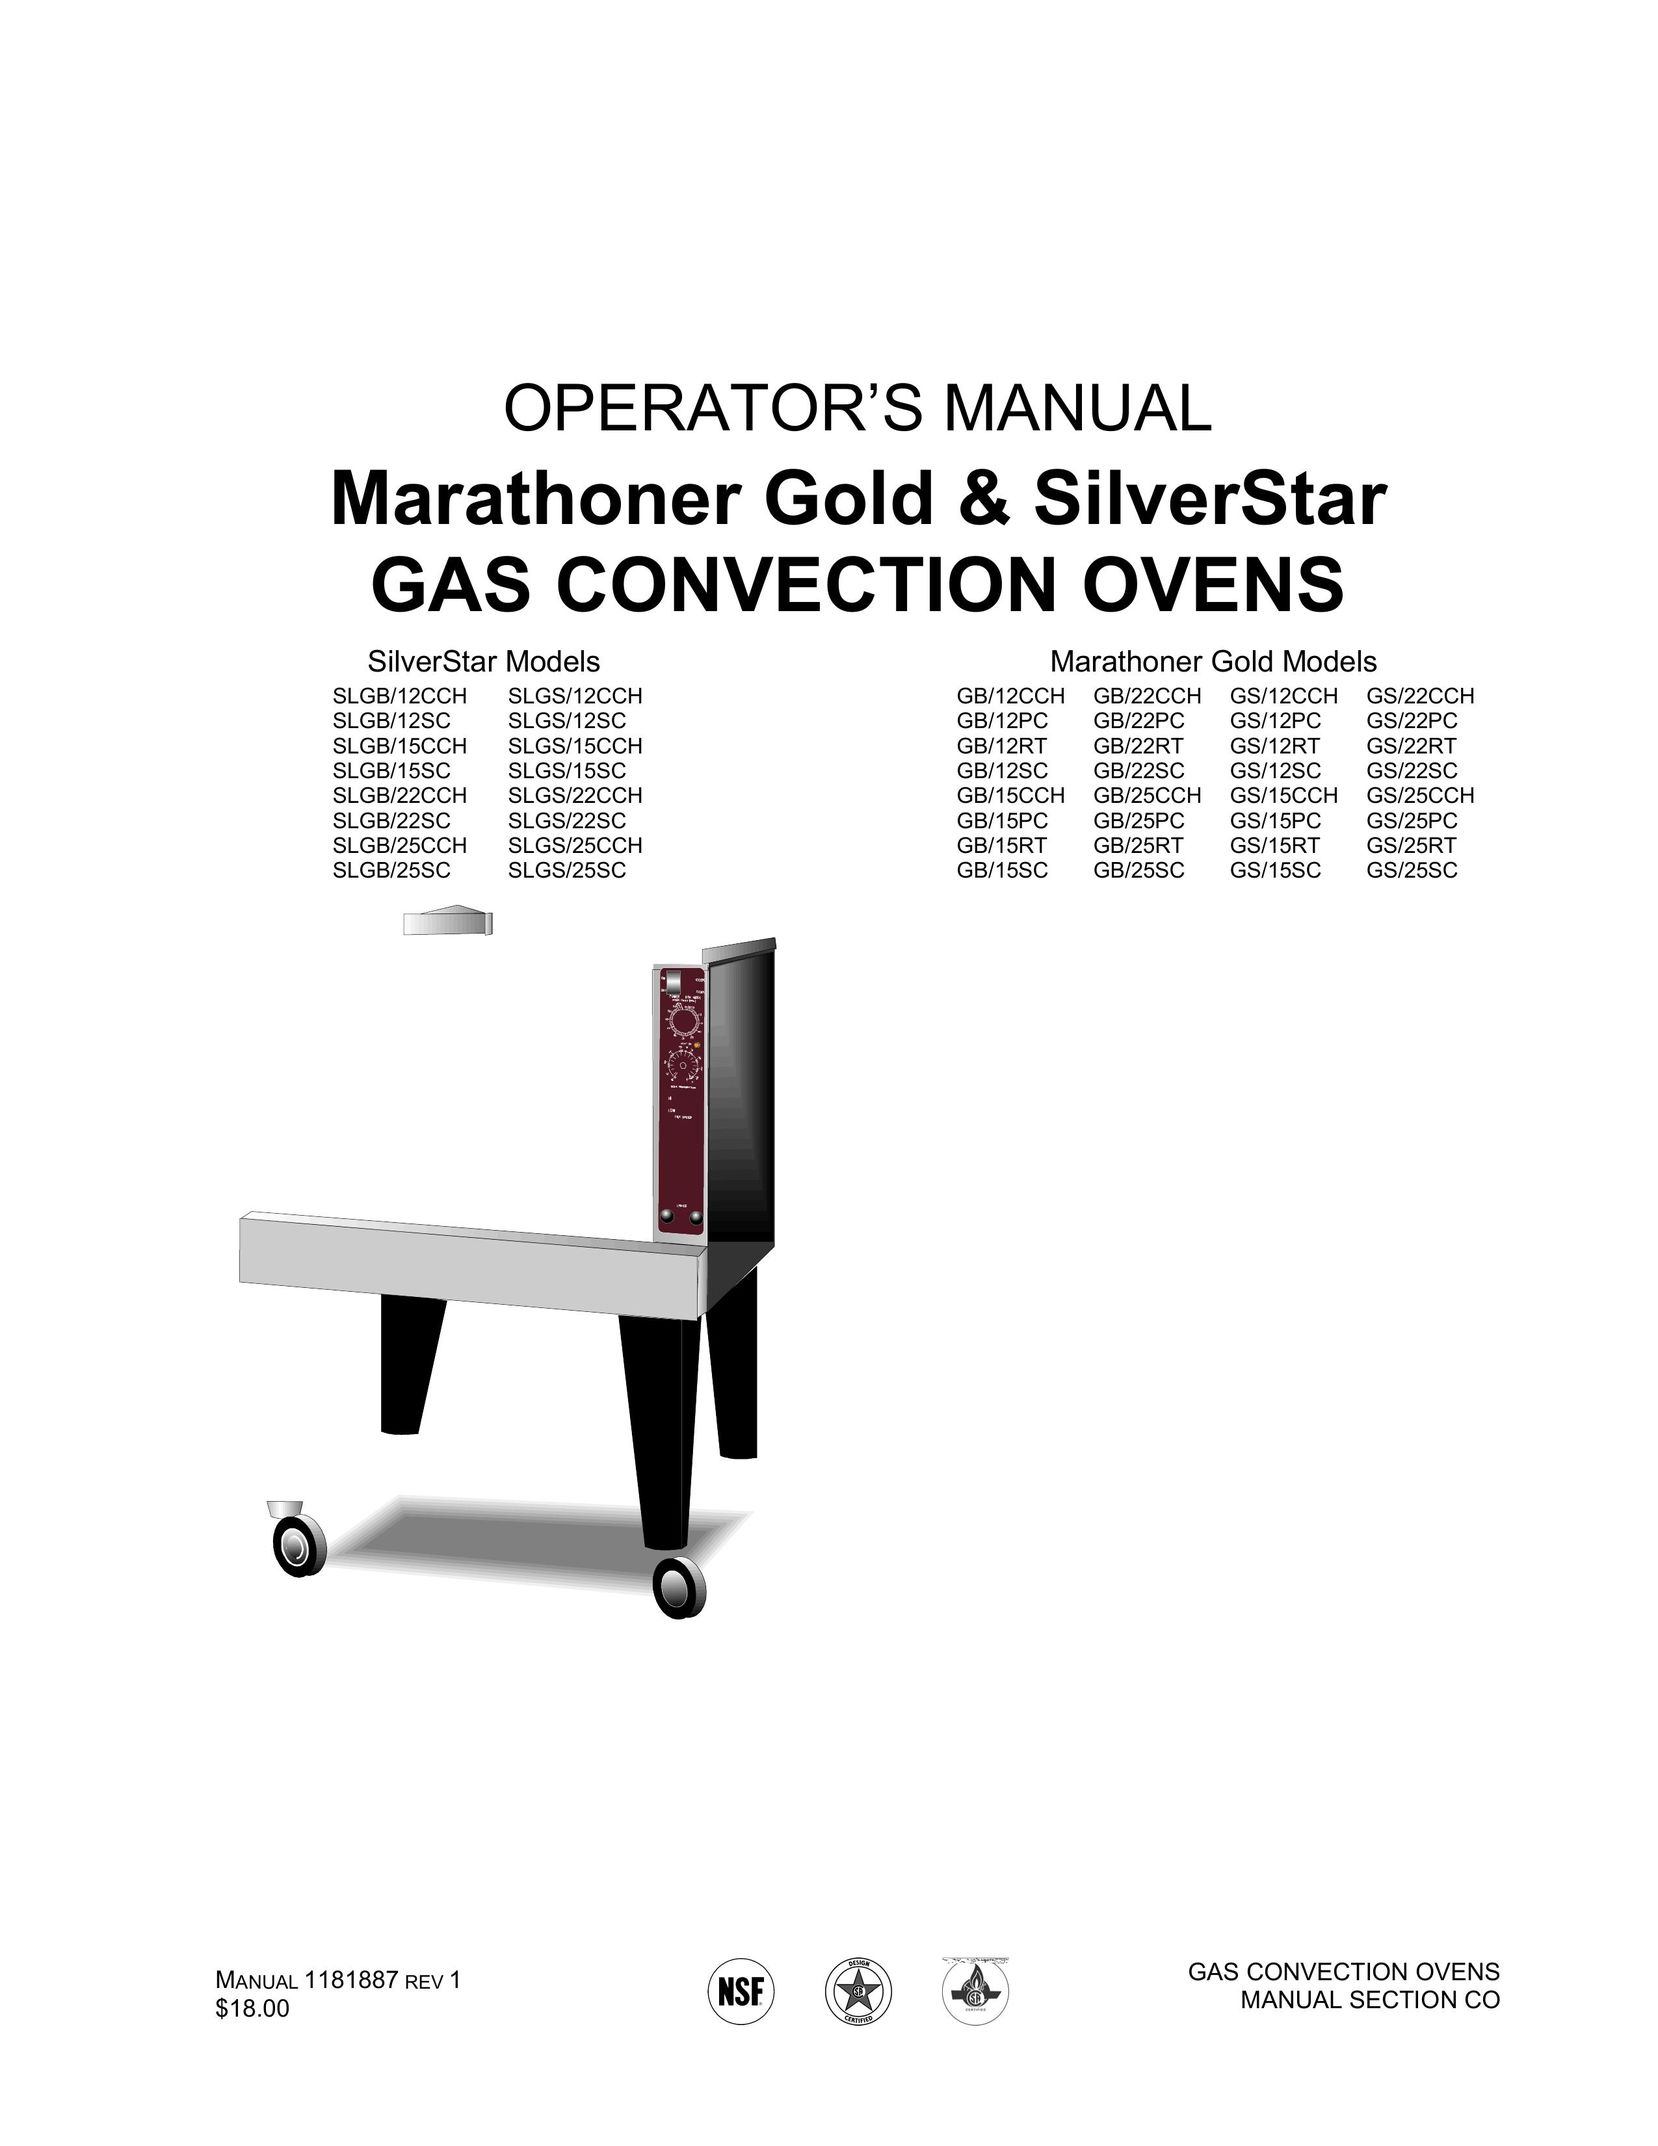 Southbend SLGB/22CCH Oven User Manual